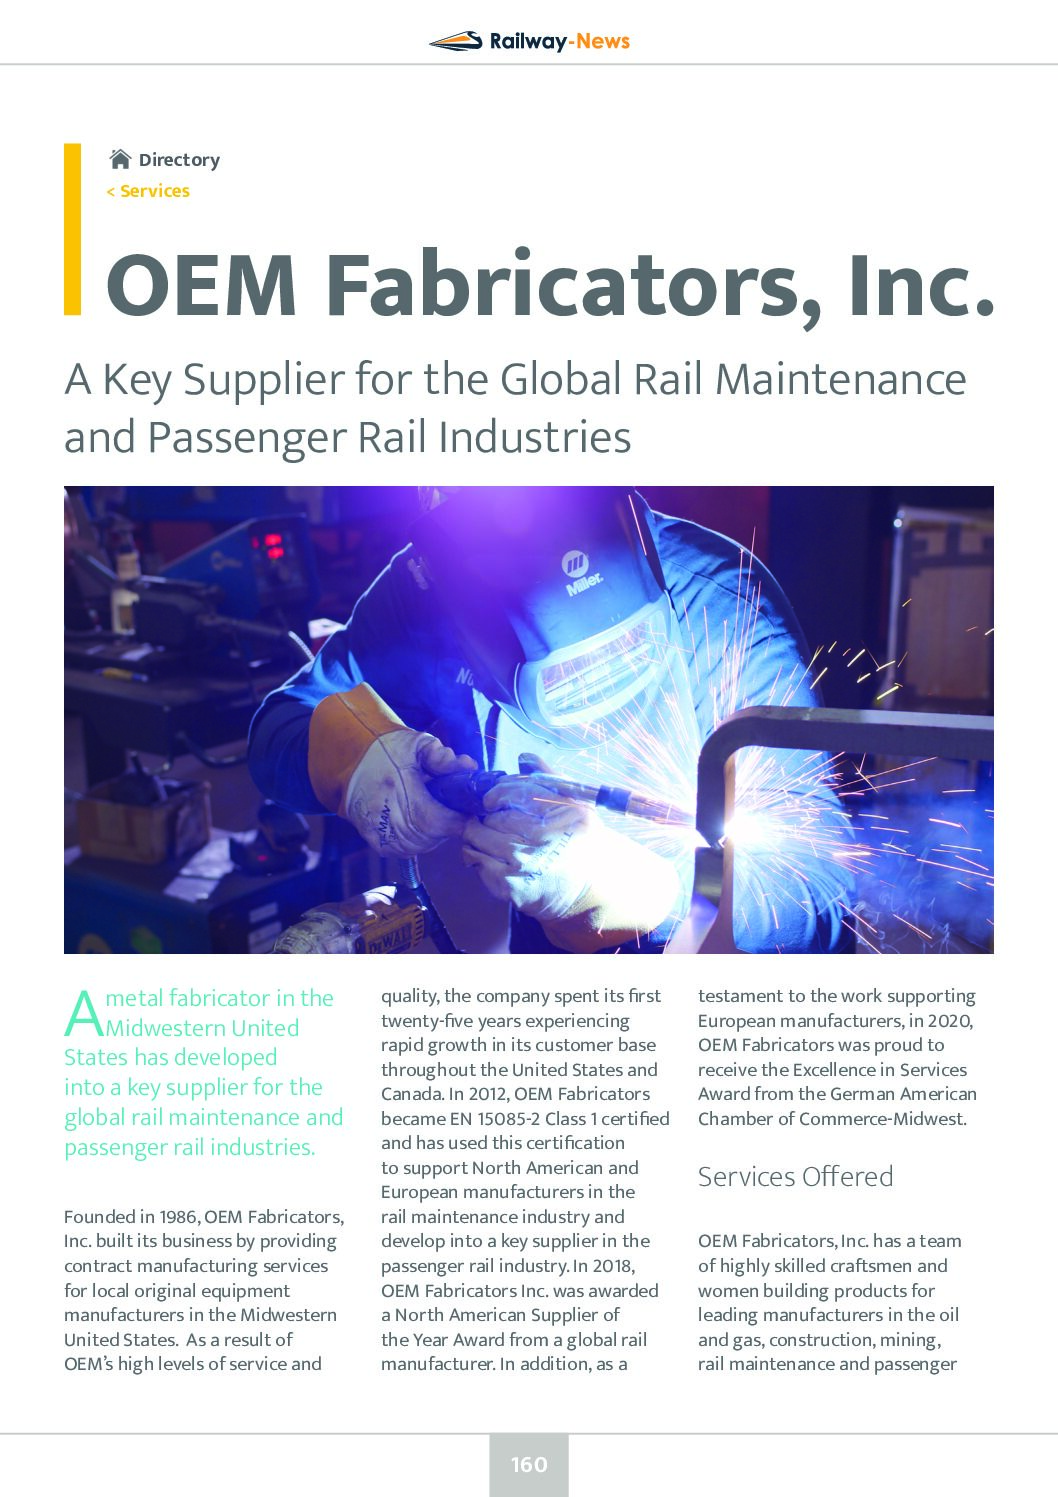 OEM Fabricators, Inc: A Key Supplier for the Global Rail Maintenance and Passenger Rail Industries